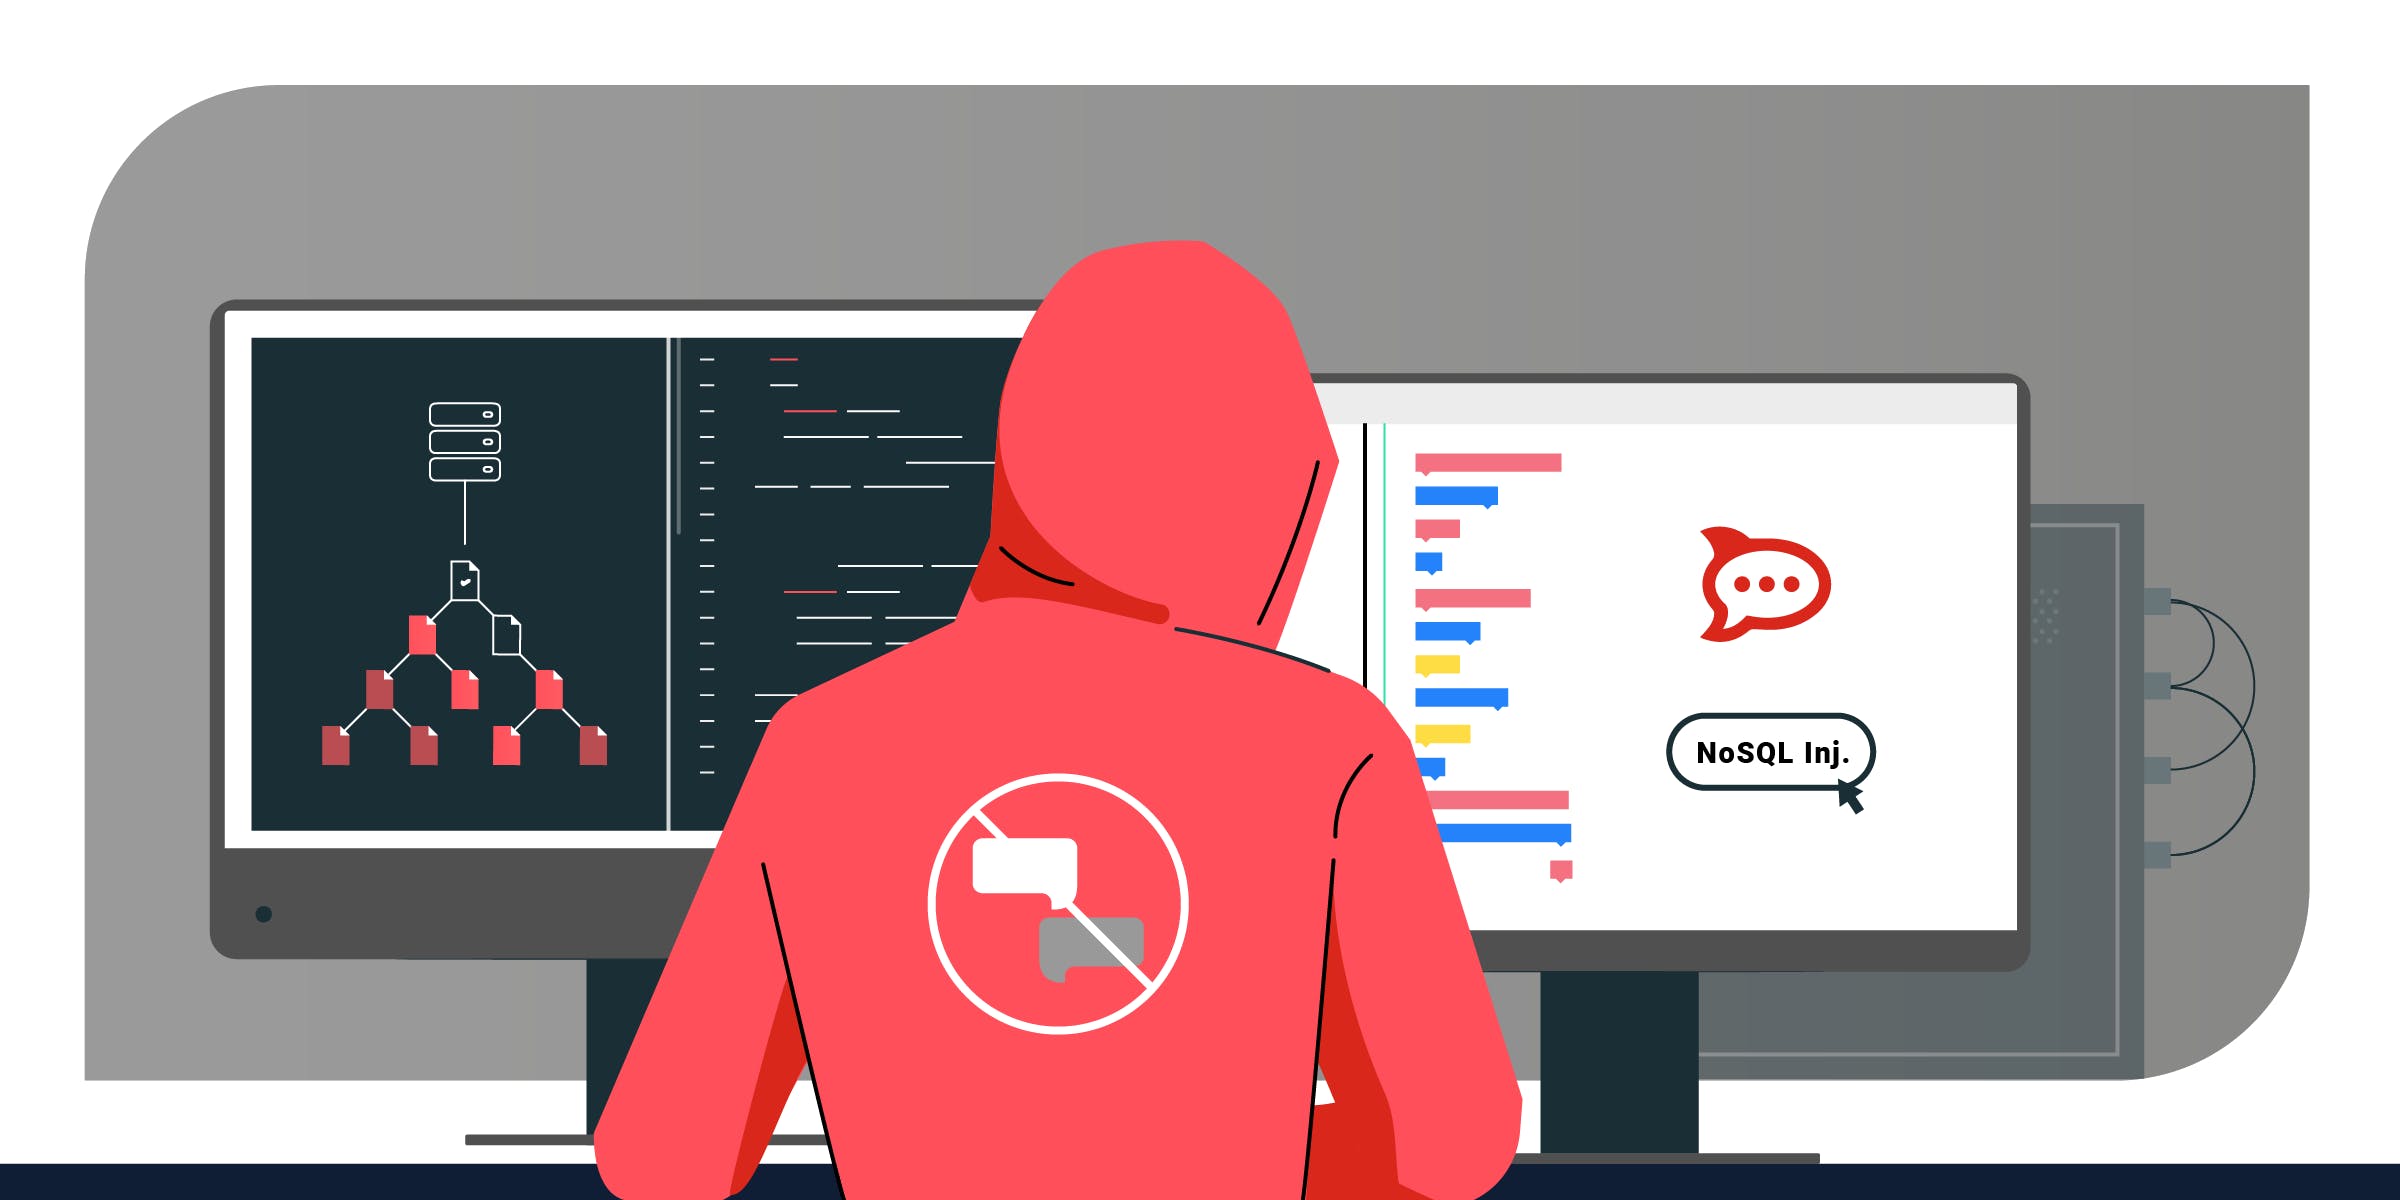 We recently discovered vulnerabilities in Rocket.Chat, a popular team communications solution, that could be used to take over Rock.Chat instances.